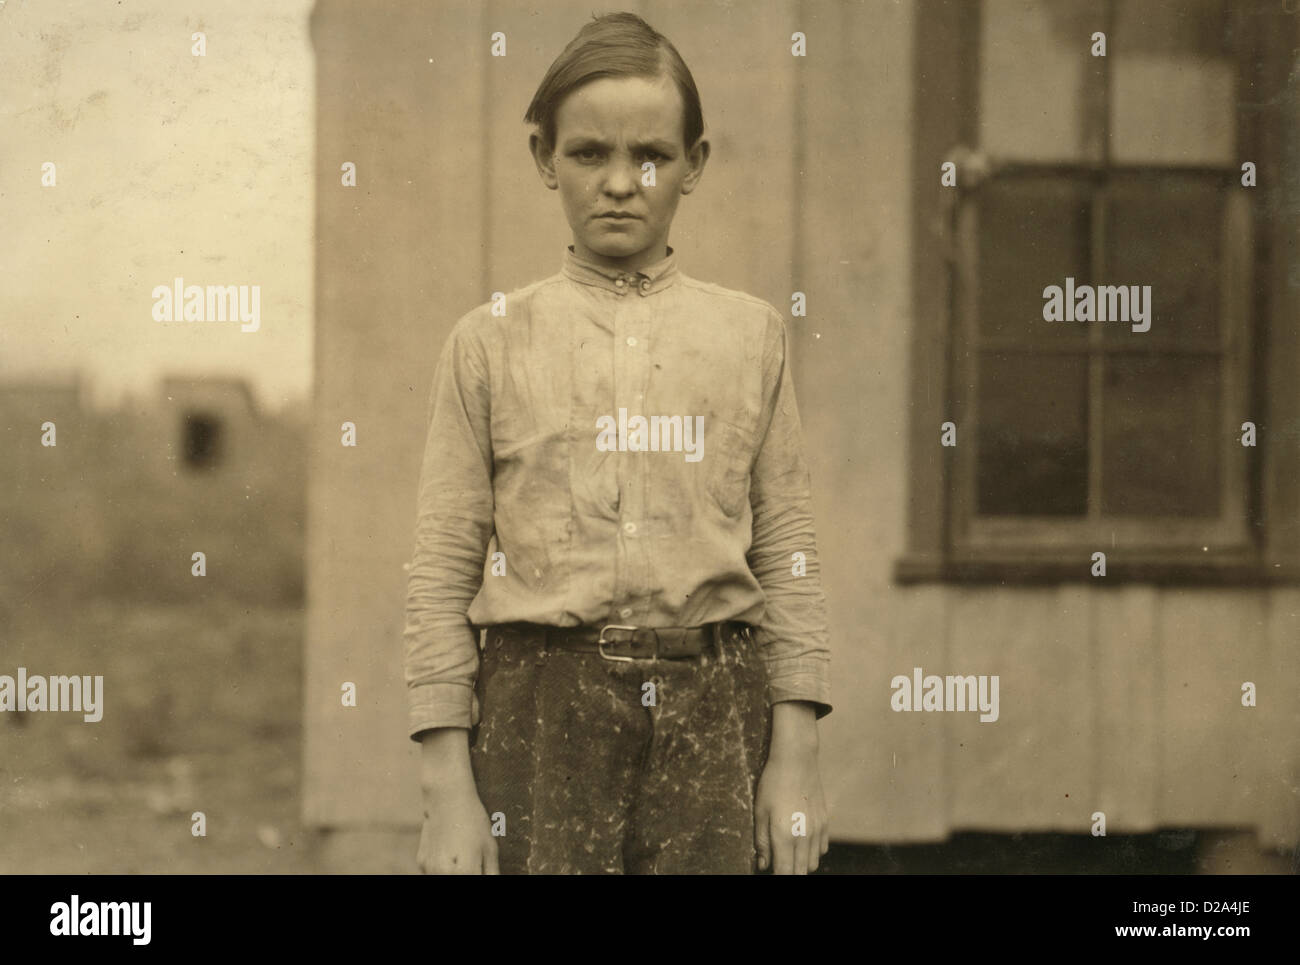 Charlie Lott Thirteen Year Old Doffer In Cotton Mill West His Family Record Says Born March 12 1900 Has Been Working For Year Stock Photo